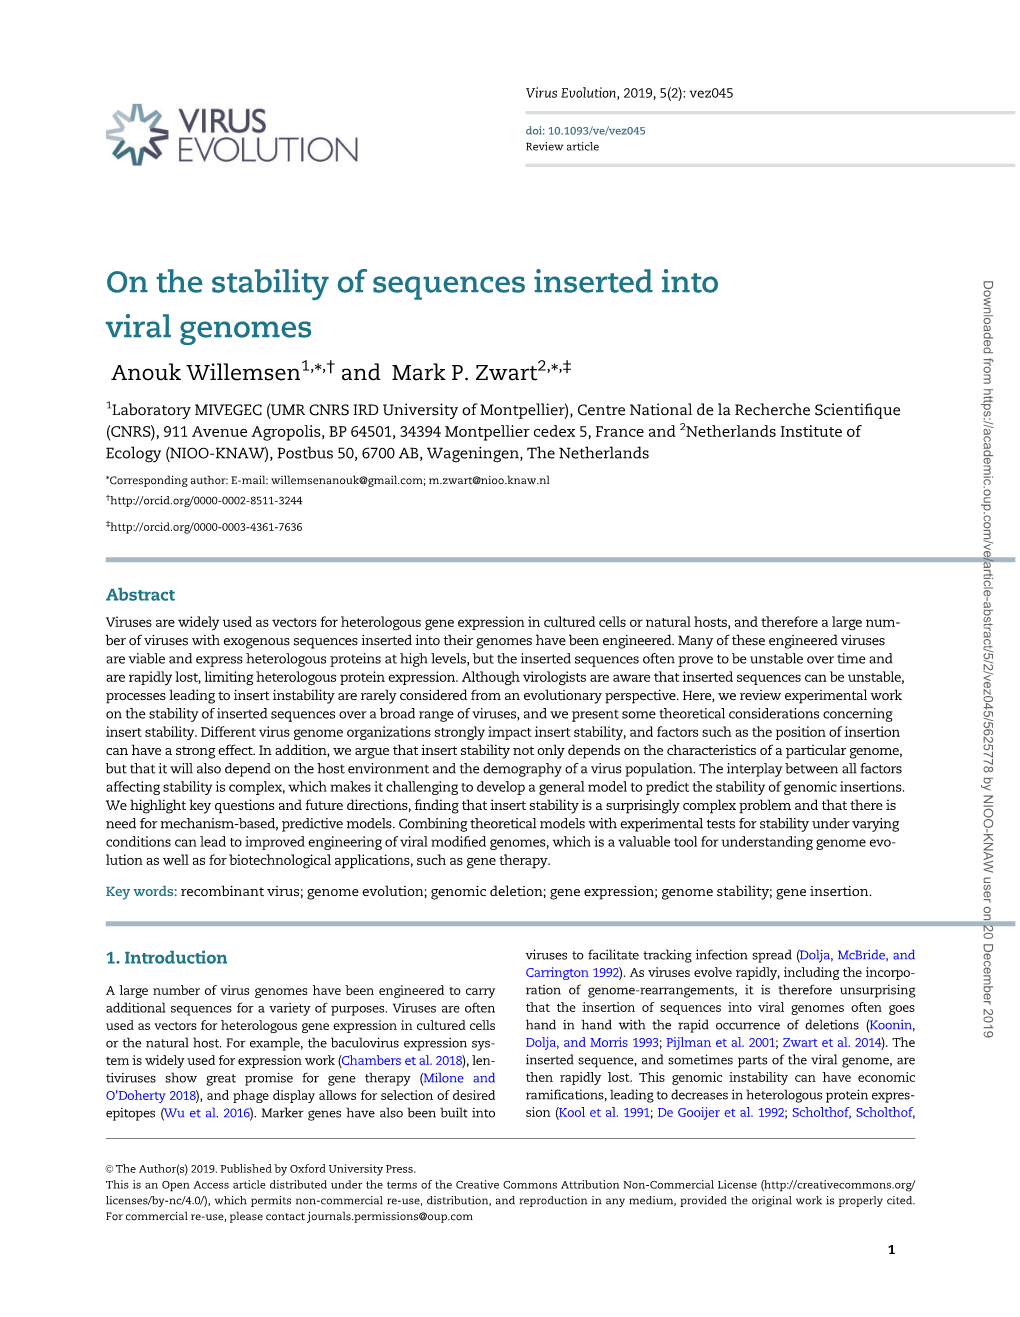 On the Stability of Sequences Inserted Into Viral Genomes